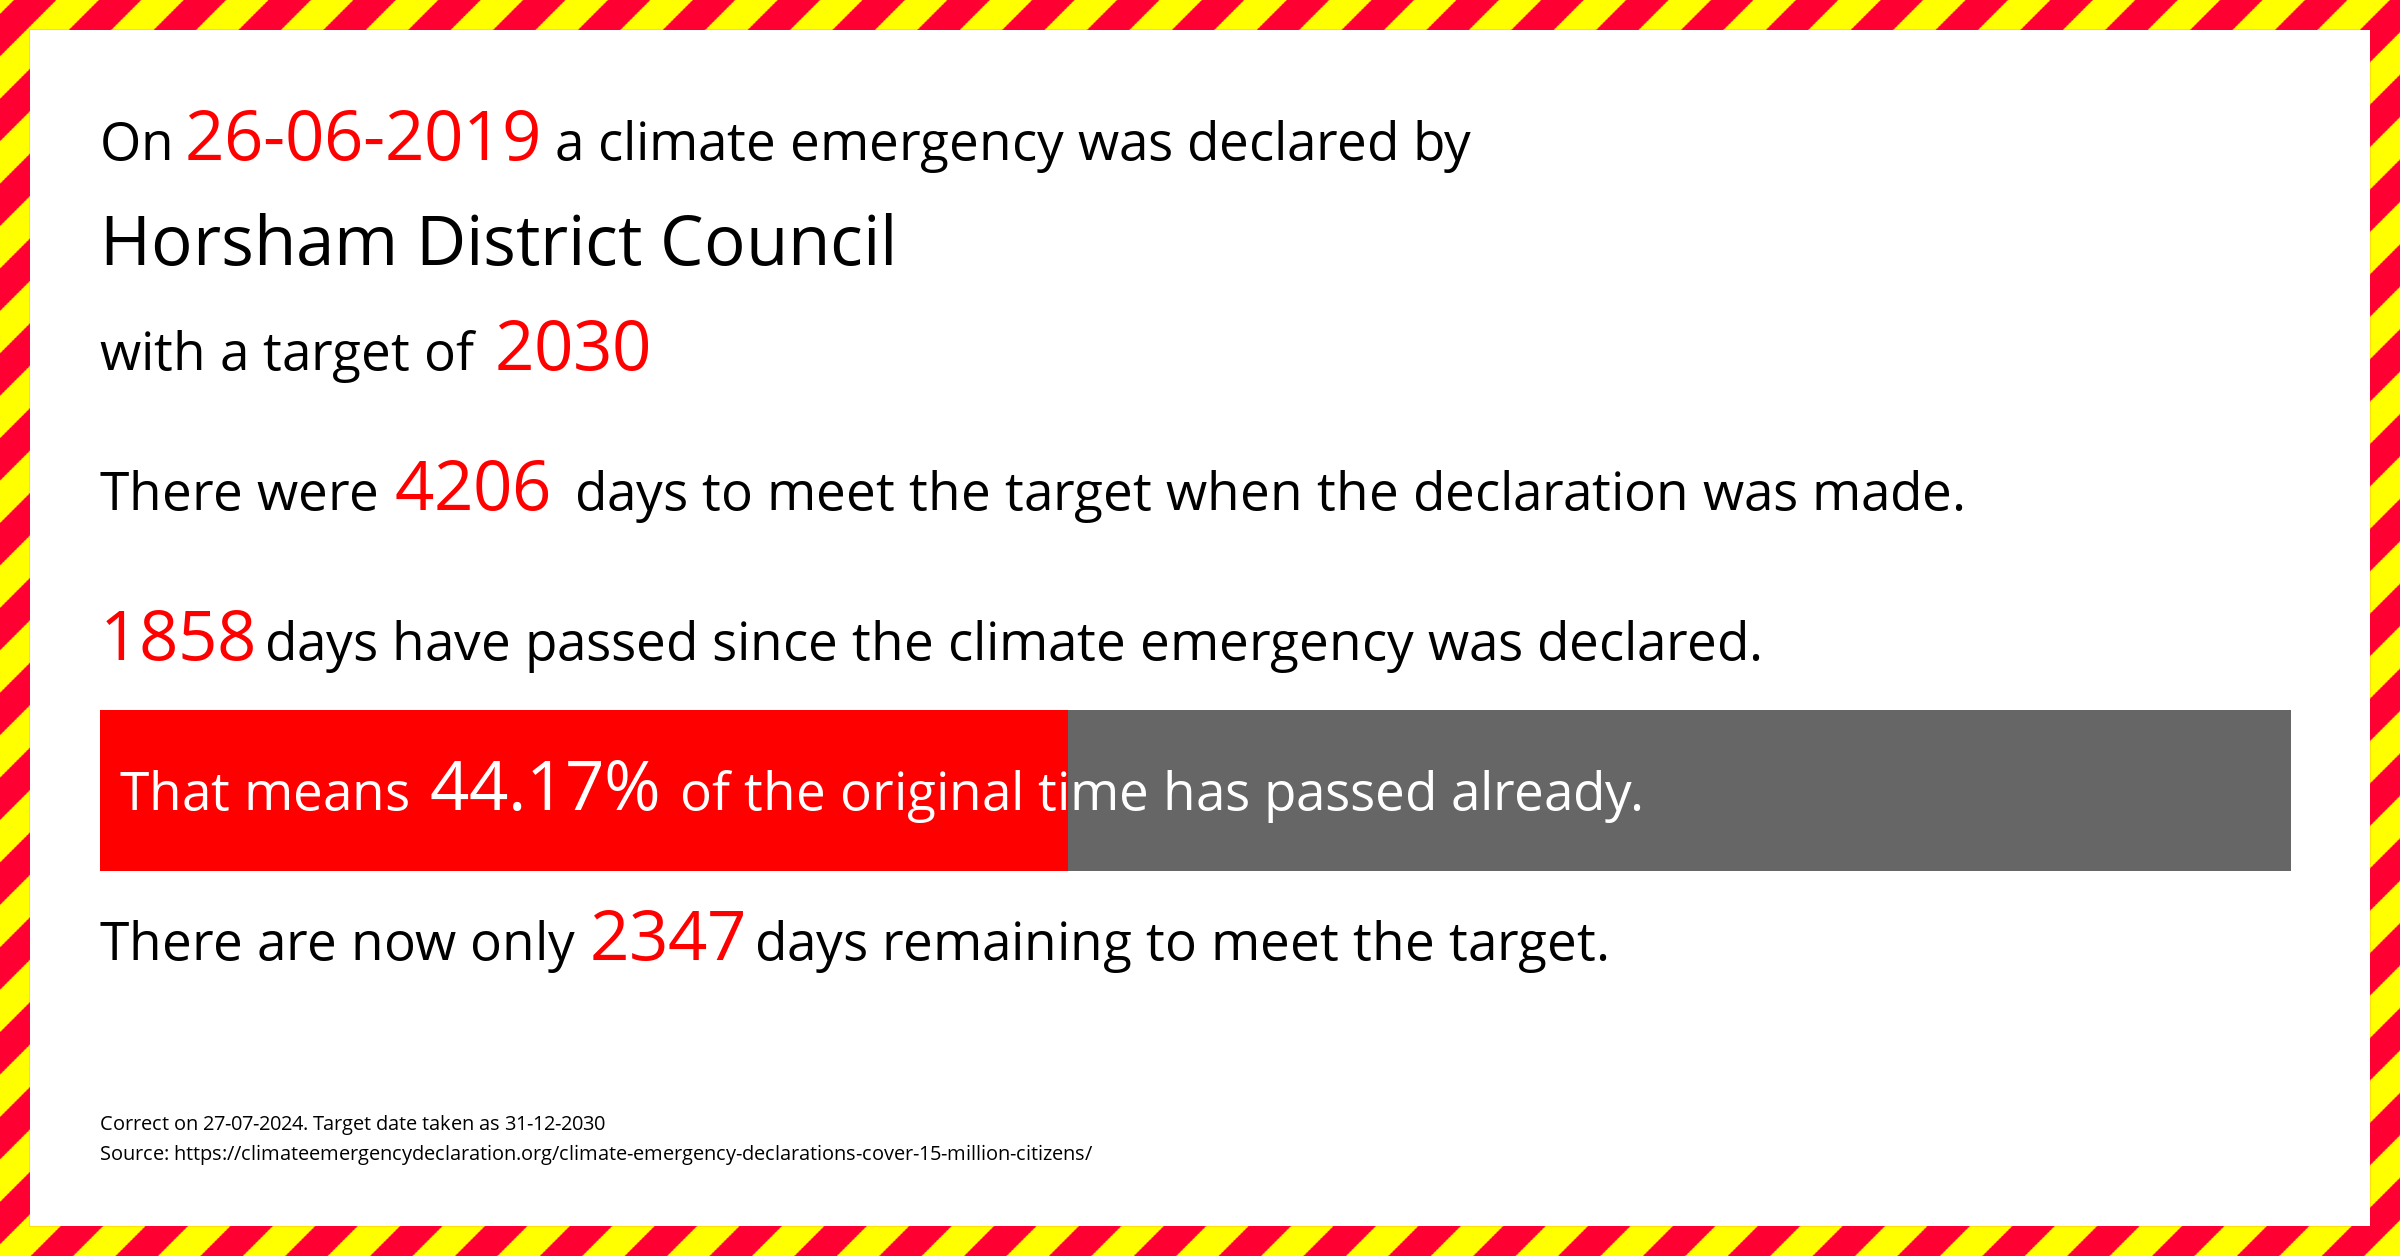 Horsham District Council declared a Climate emergency on Wednesday 26th June 2019, with a target of 2030.